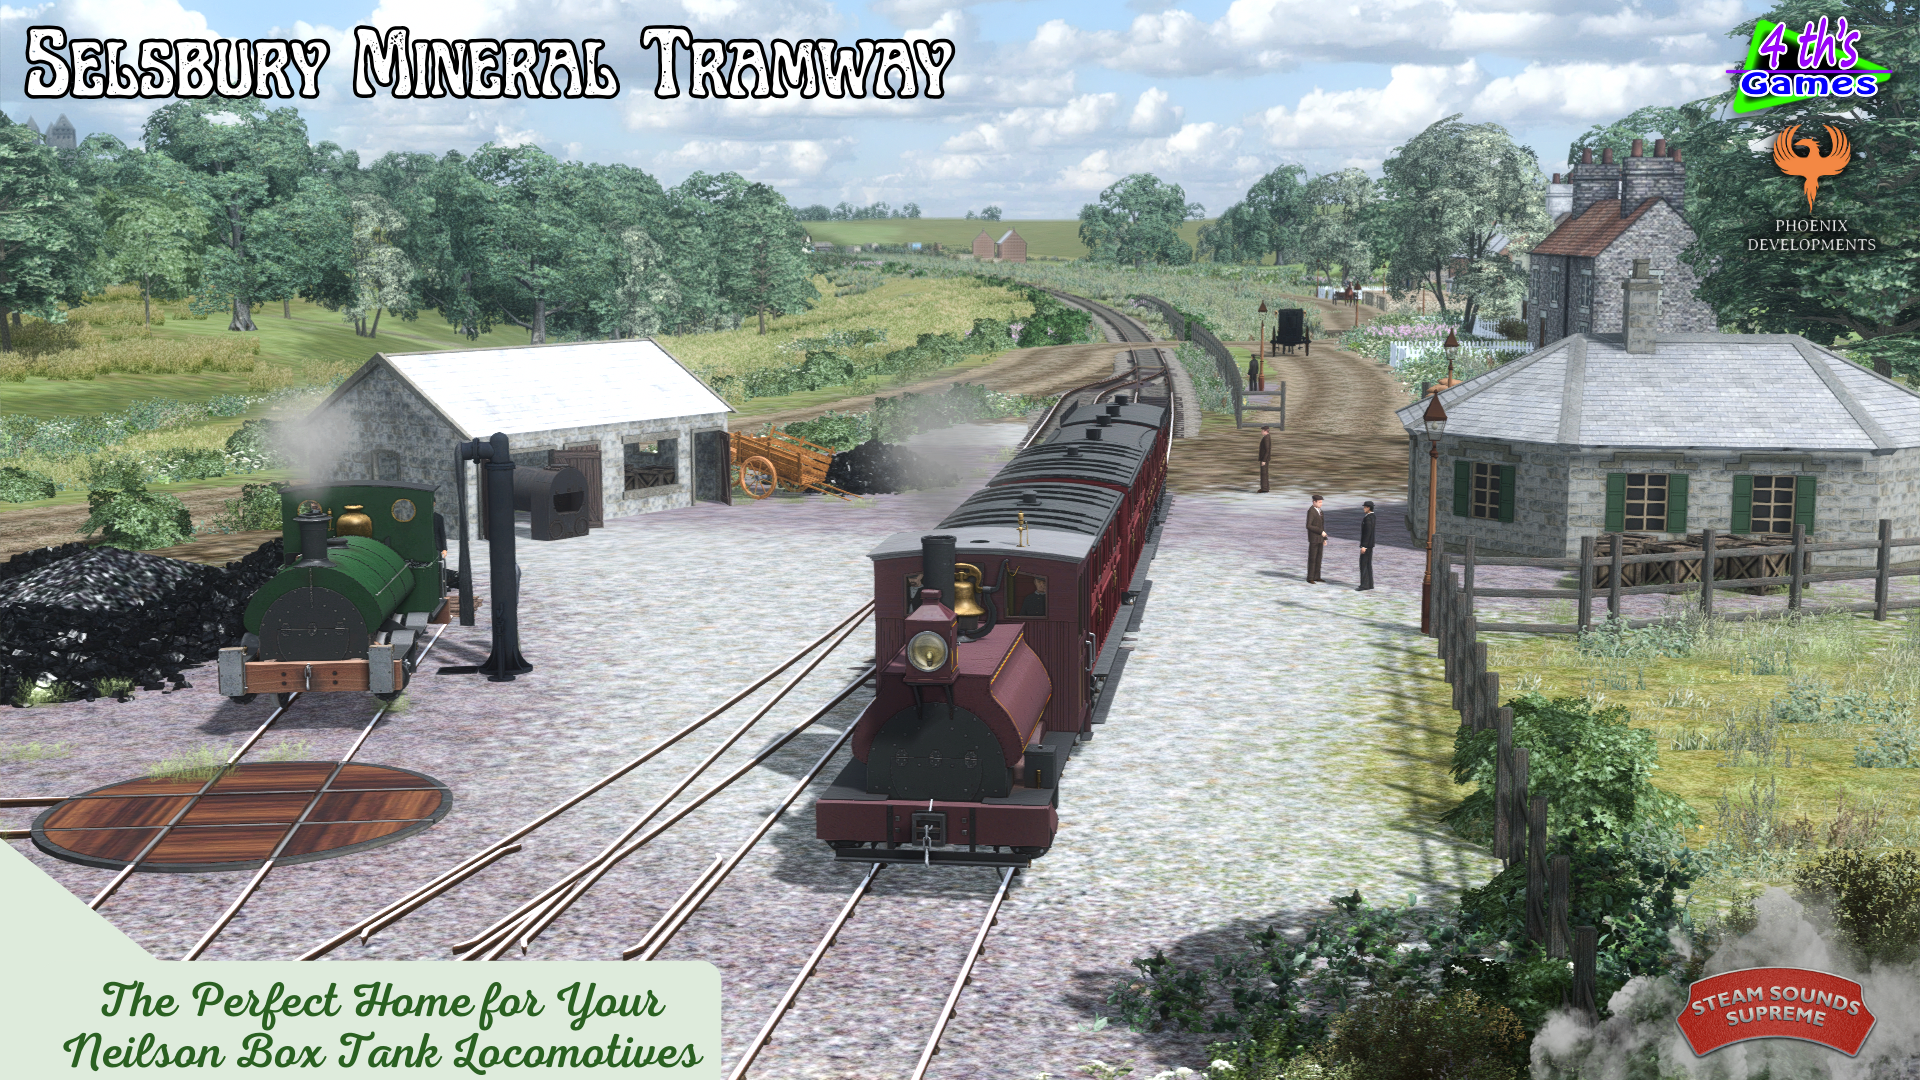 Selsbury Mineral Tramway_Journey06.png